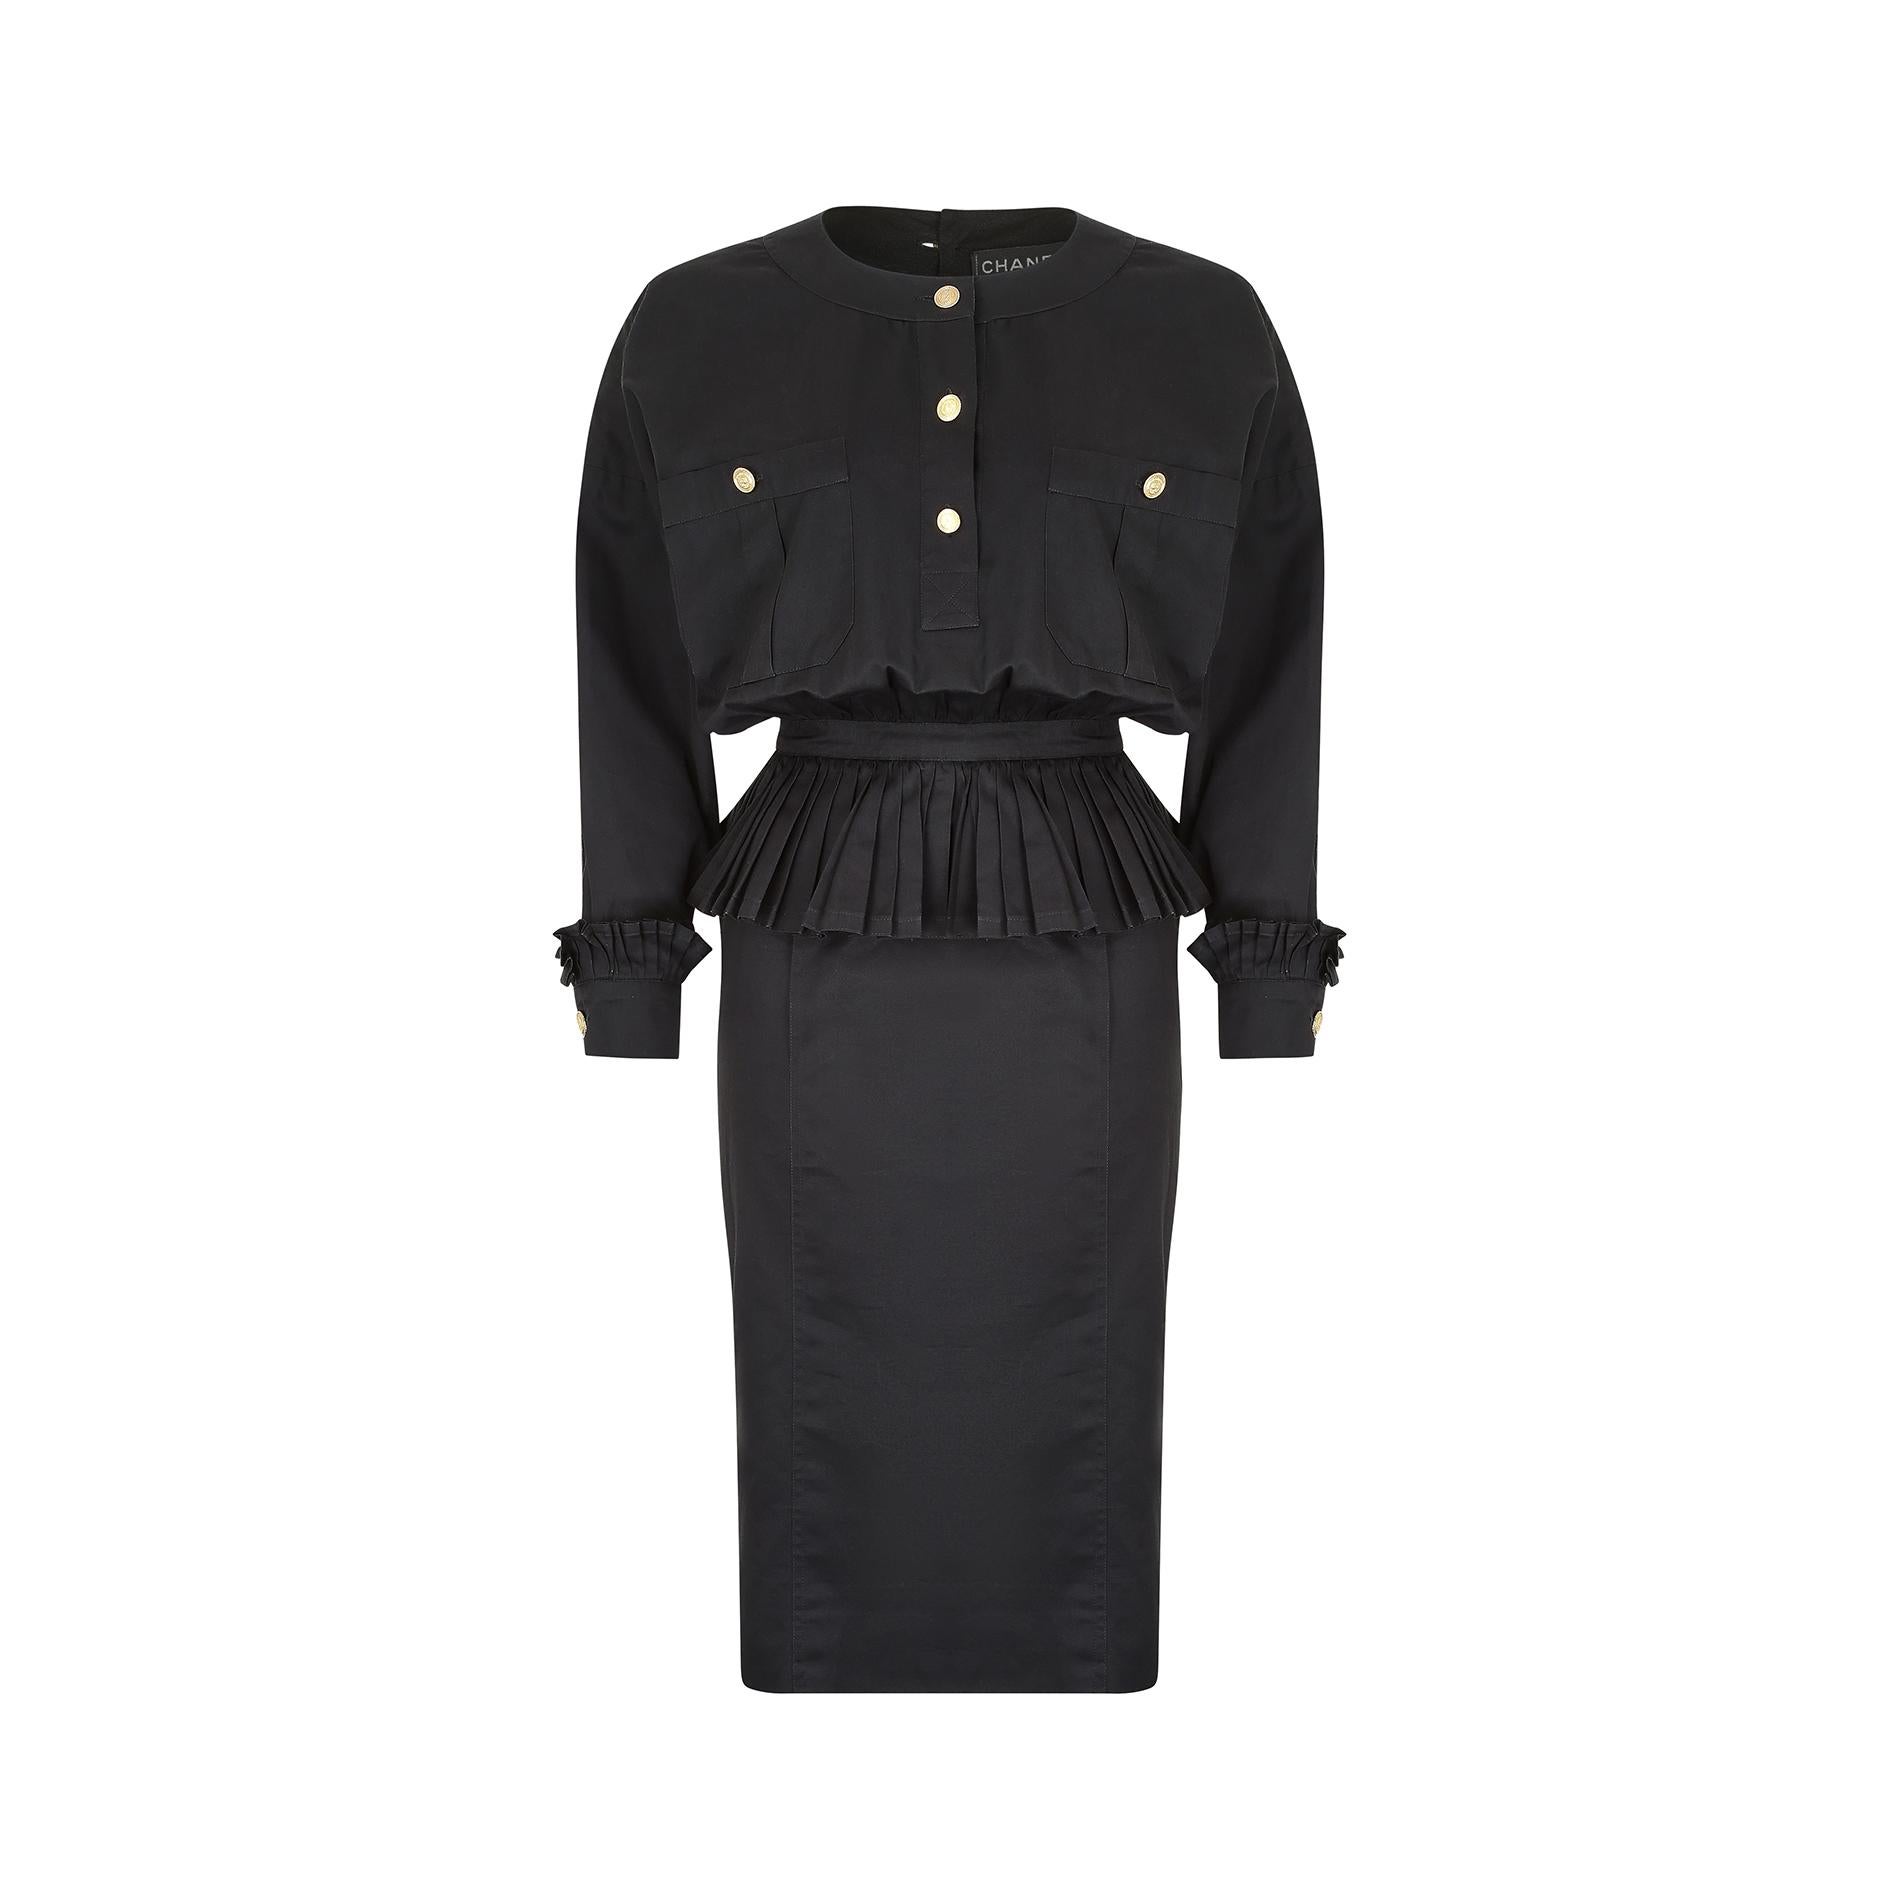 This Chanel black cotton dress is an amazing example of the fashion house's expert tailoring, and of the structured styles of the 1980s. It has a high rounded neckline, sloped, dropped seam shoulders and fastens down the back of the bodice with four